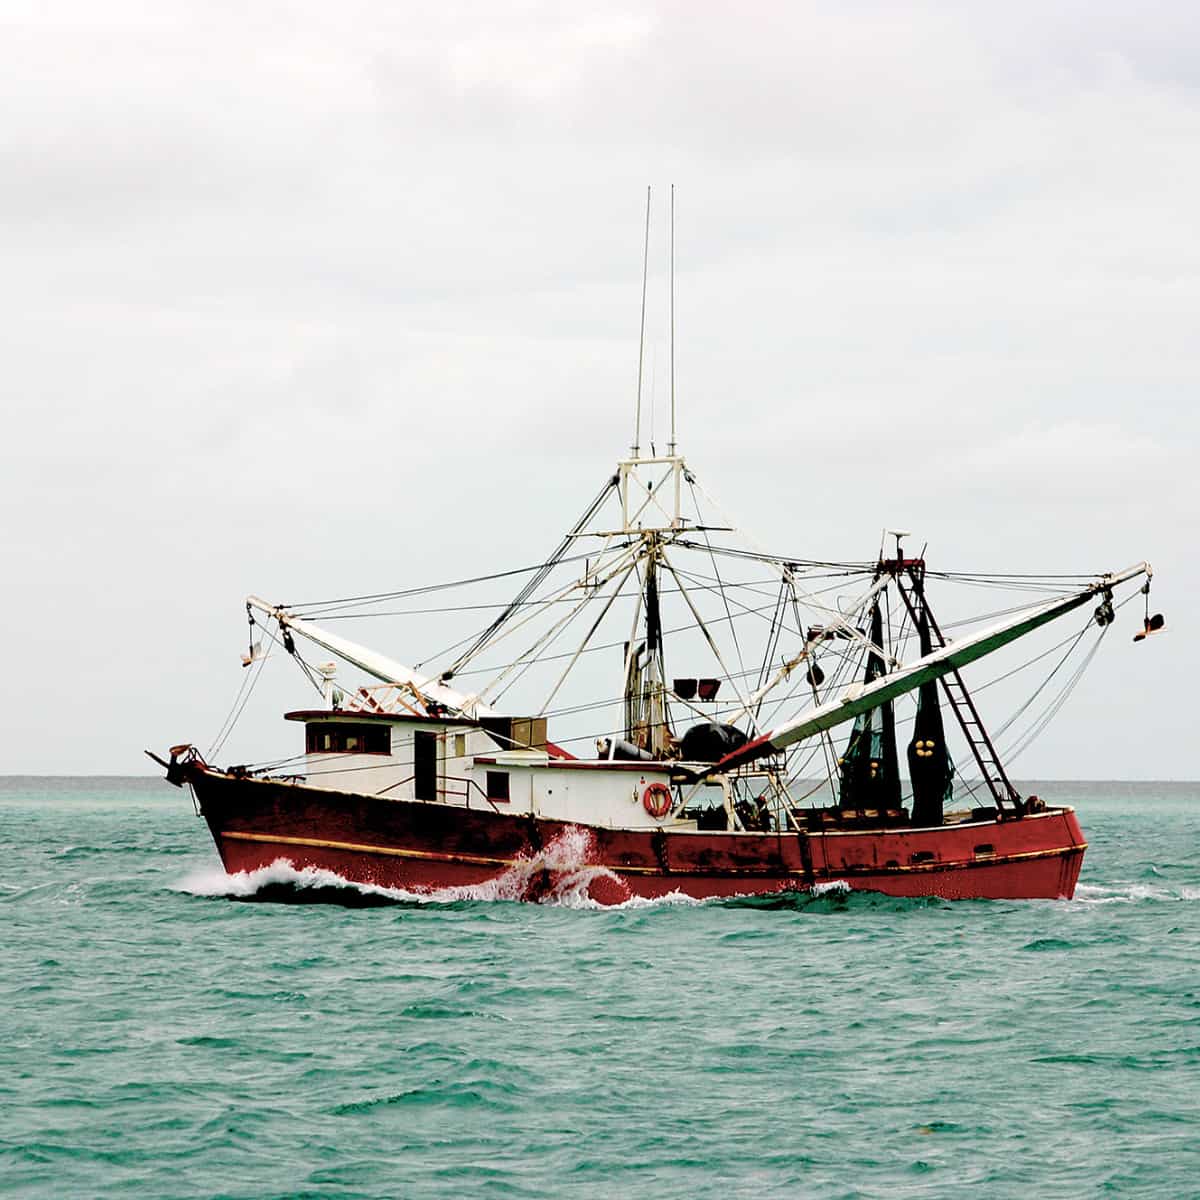 Shrimp boat on the water 